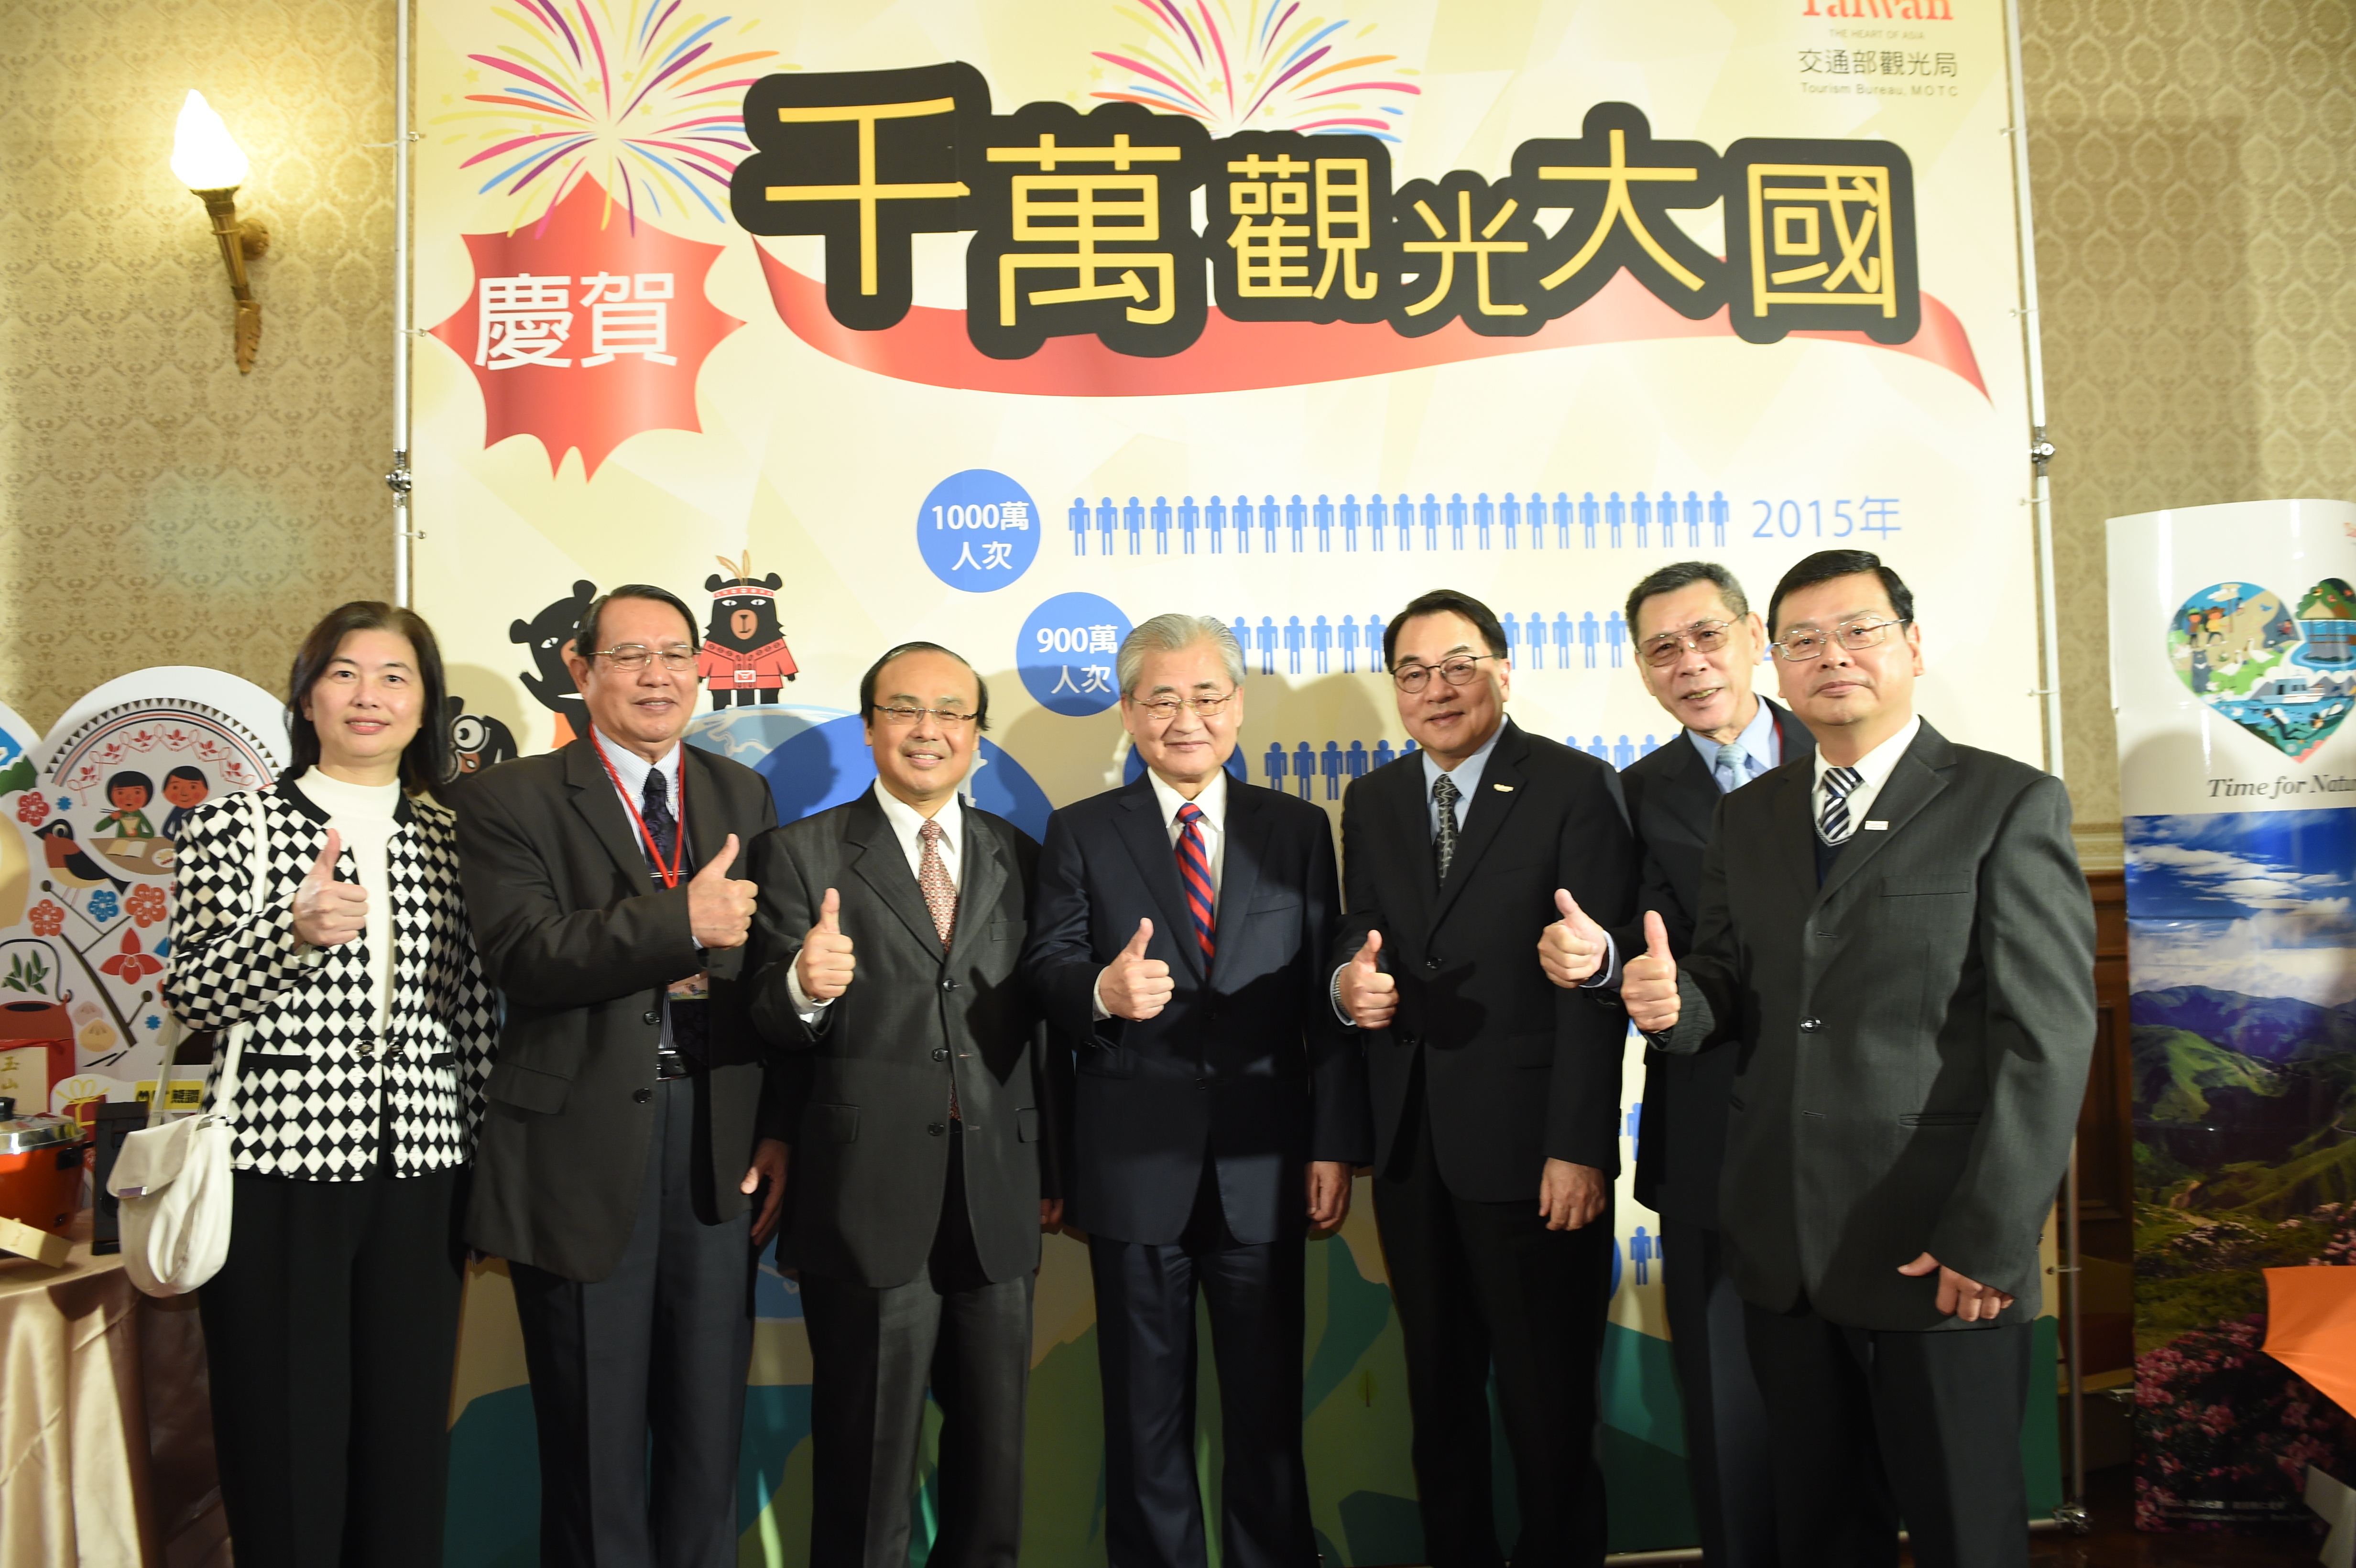 Premier welcomes Taiwan’s 10 millionth visitor of 2015